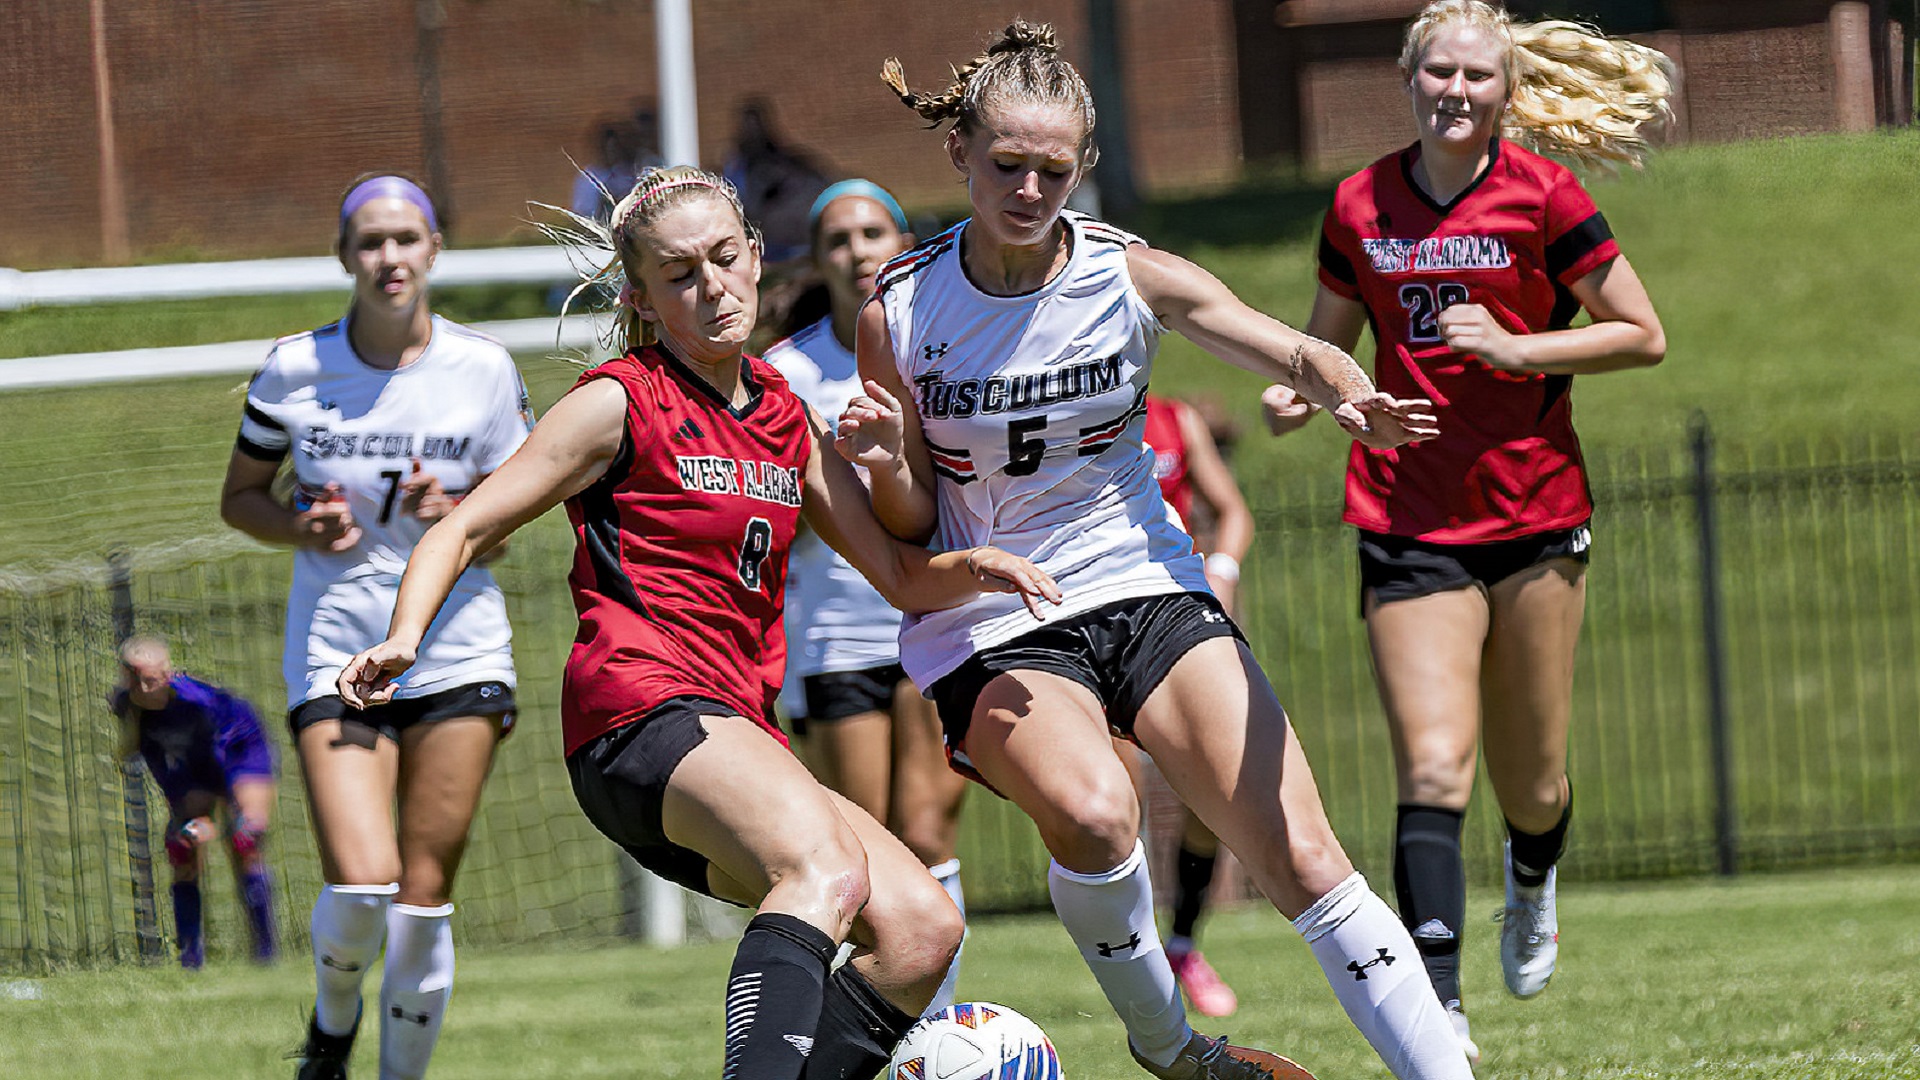 Sydney Grant scored two first-half goals against West Alabama (photo by Chuck Williams)